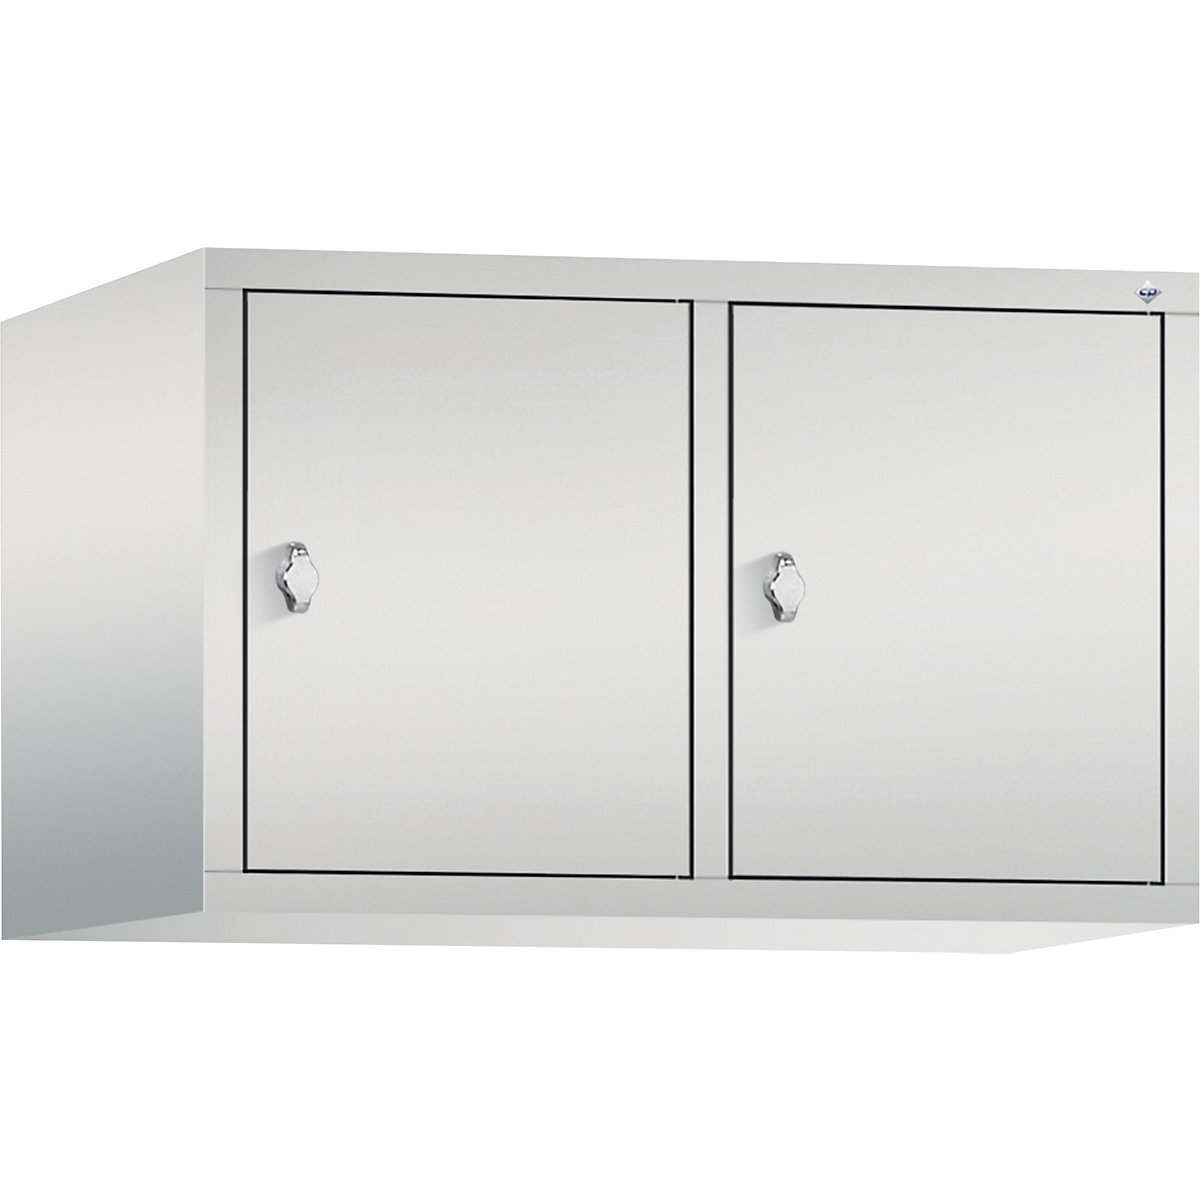 CLASSIC add-on cupboard – C+P, 2 compartments, compartment width 400 mm, light grey-4